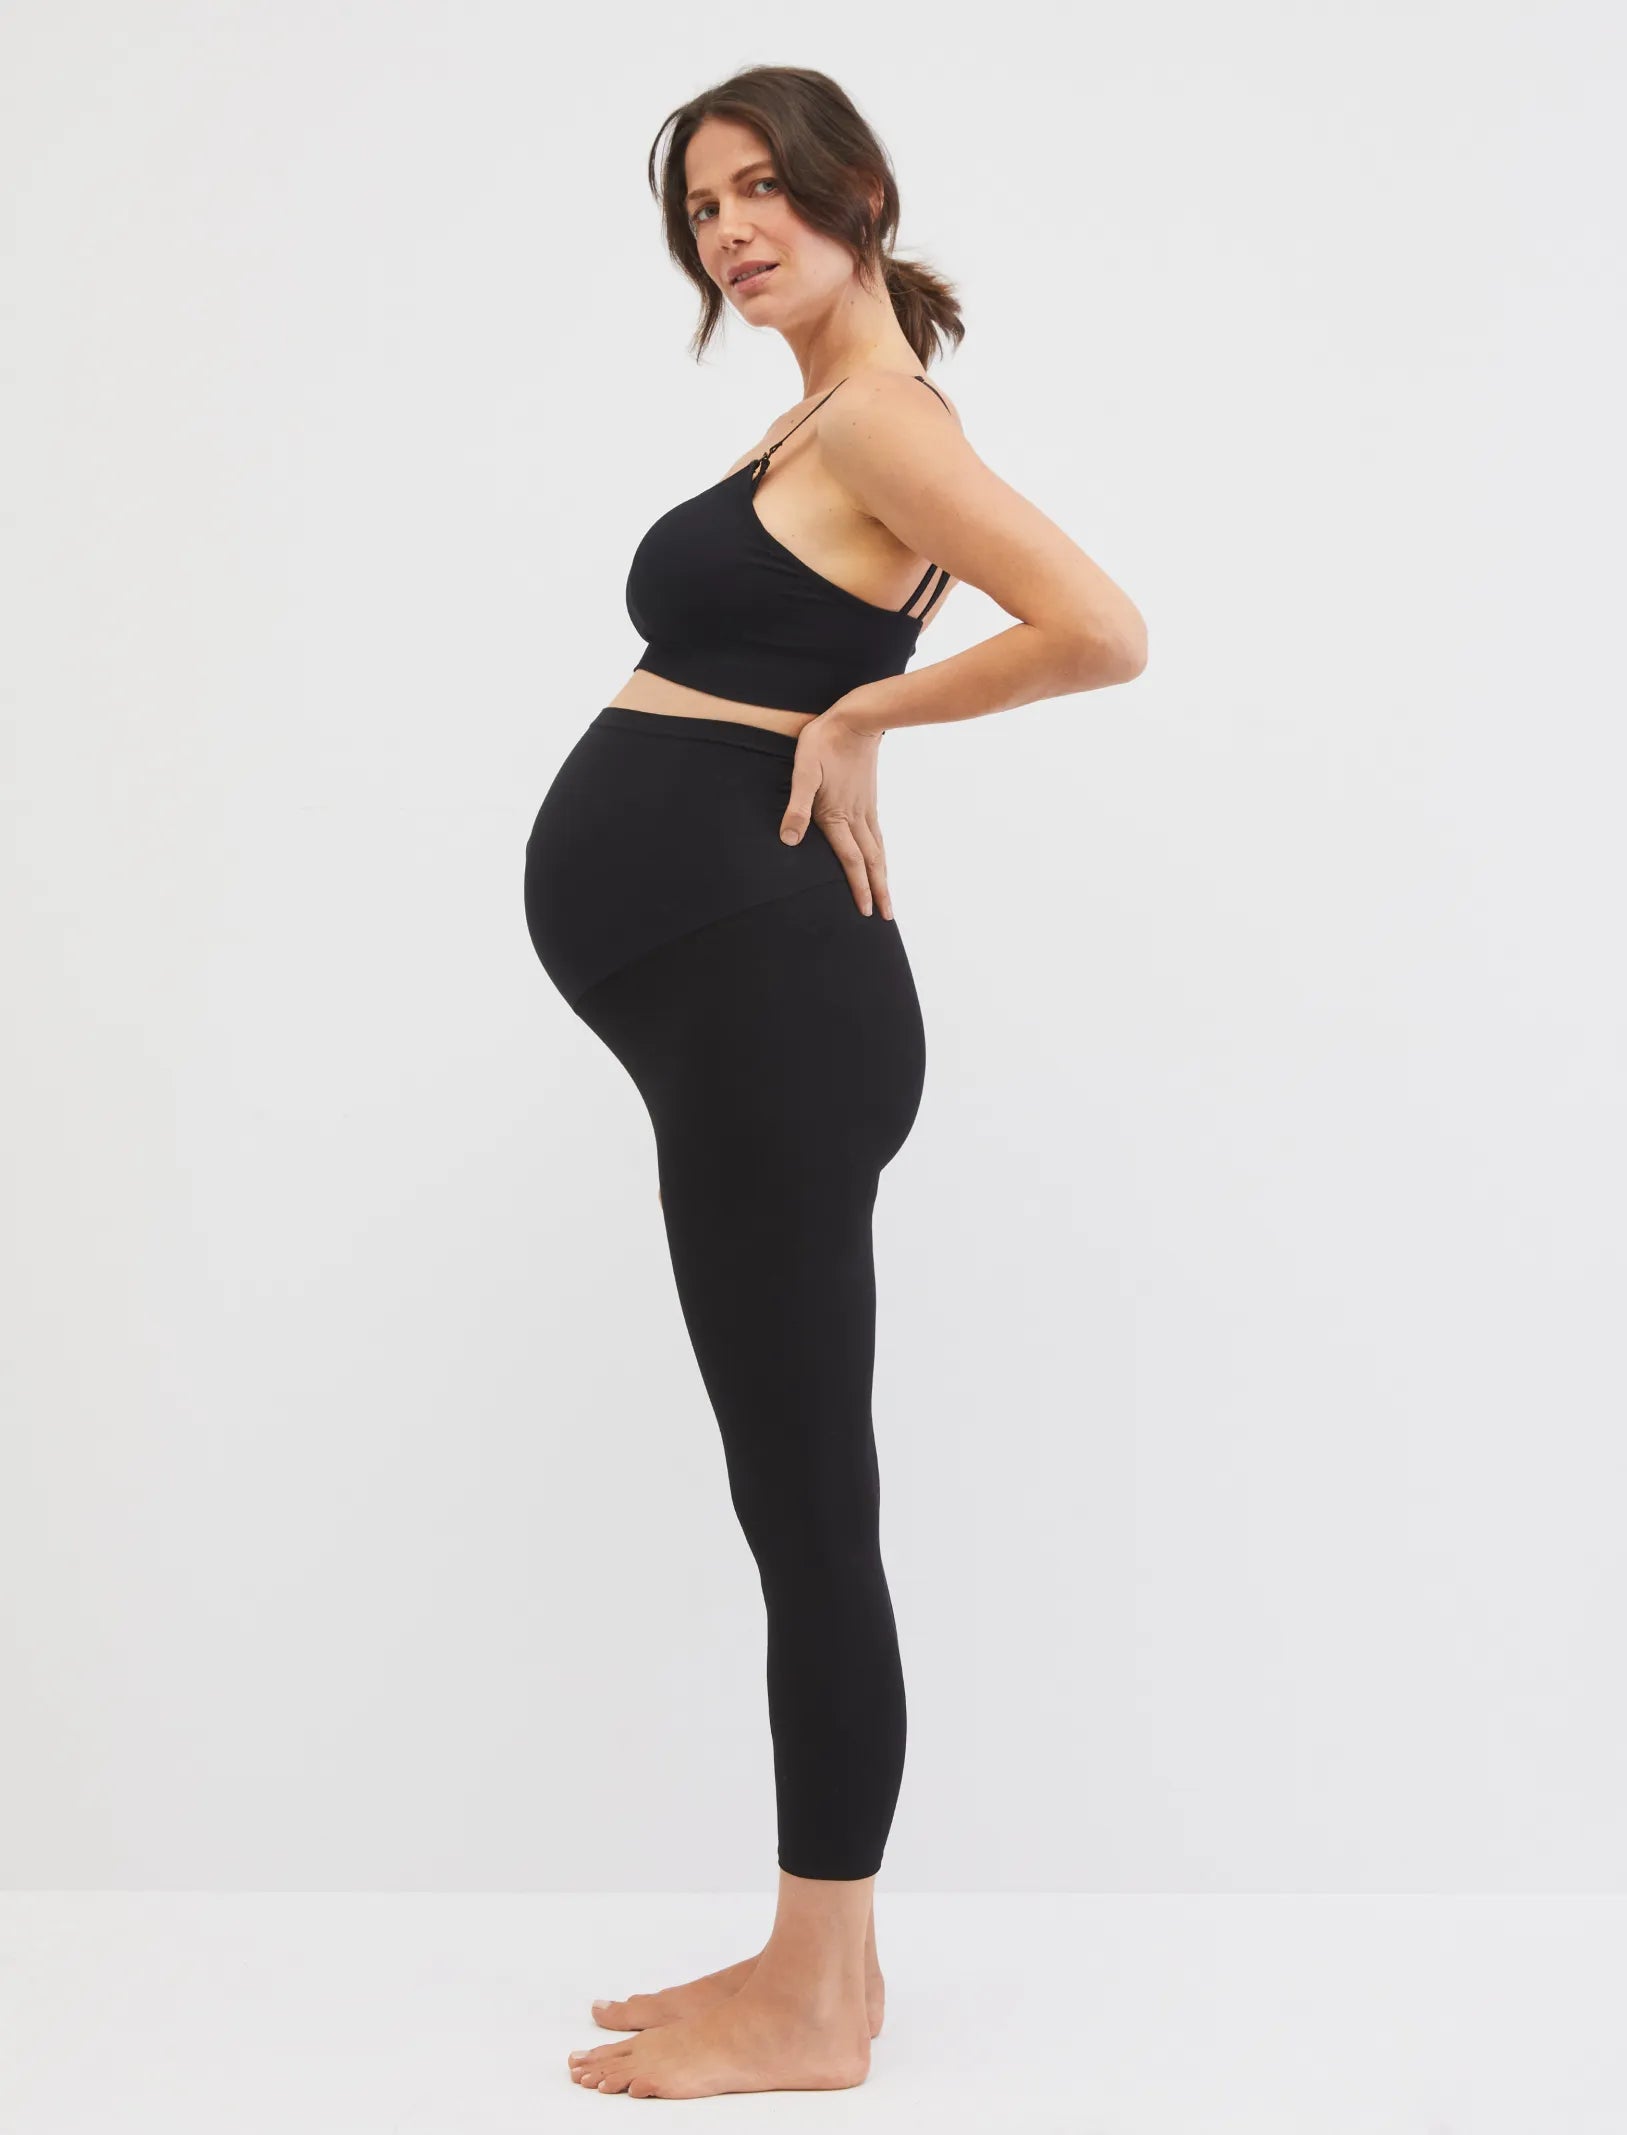 Can You Do Pilates While Pregnant? The 411